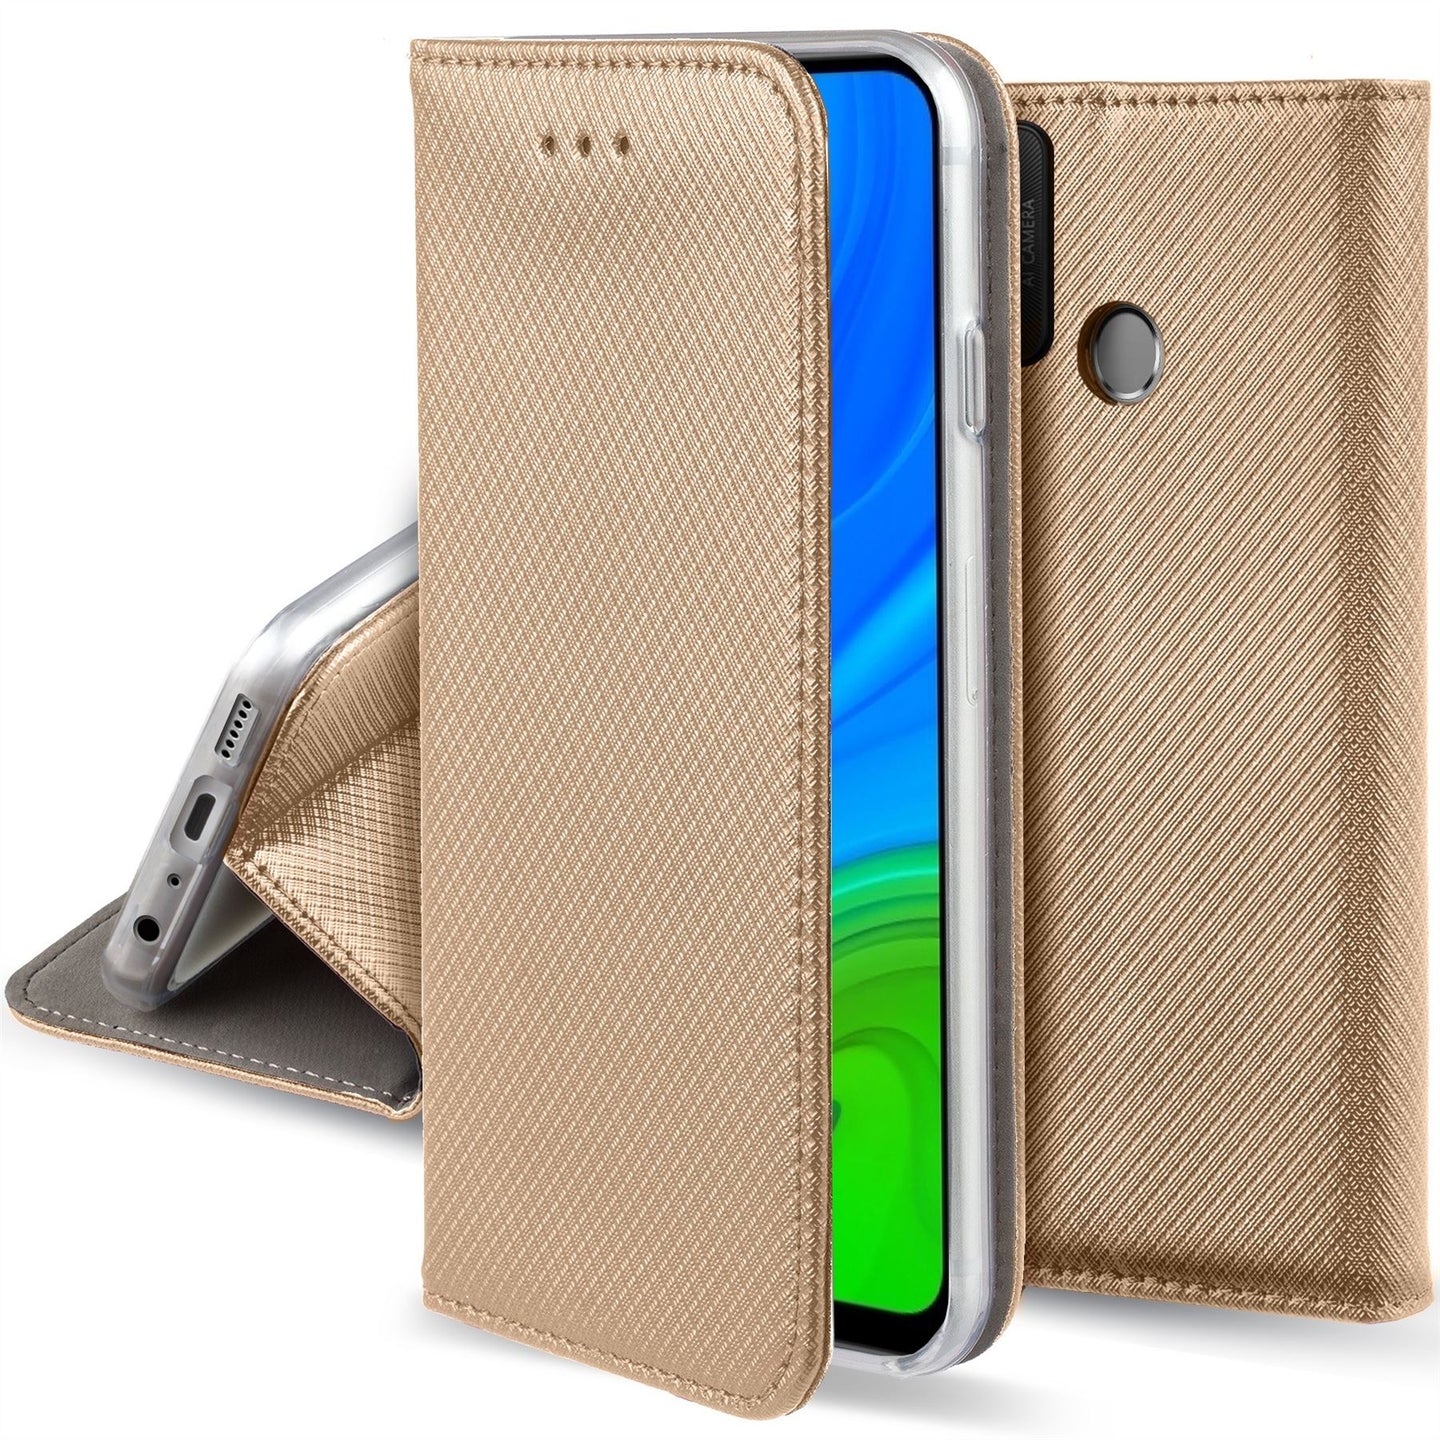 Moozy Case Flip Cover for Huawei P Smart 2020, Gold - Smart Magnetic Flip Case with Card Holder and Stand